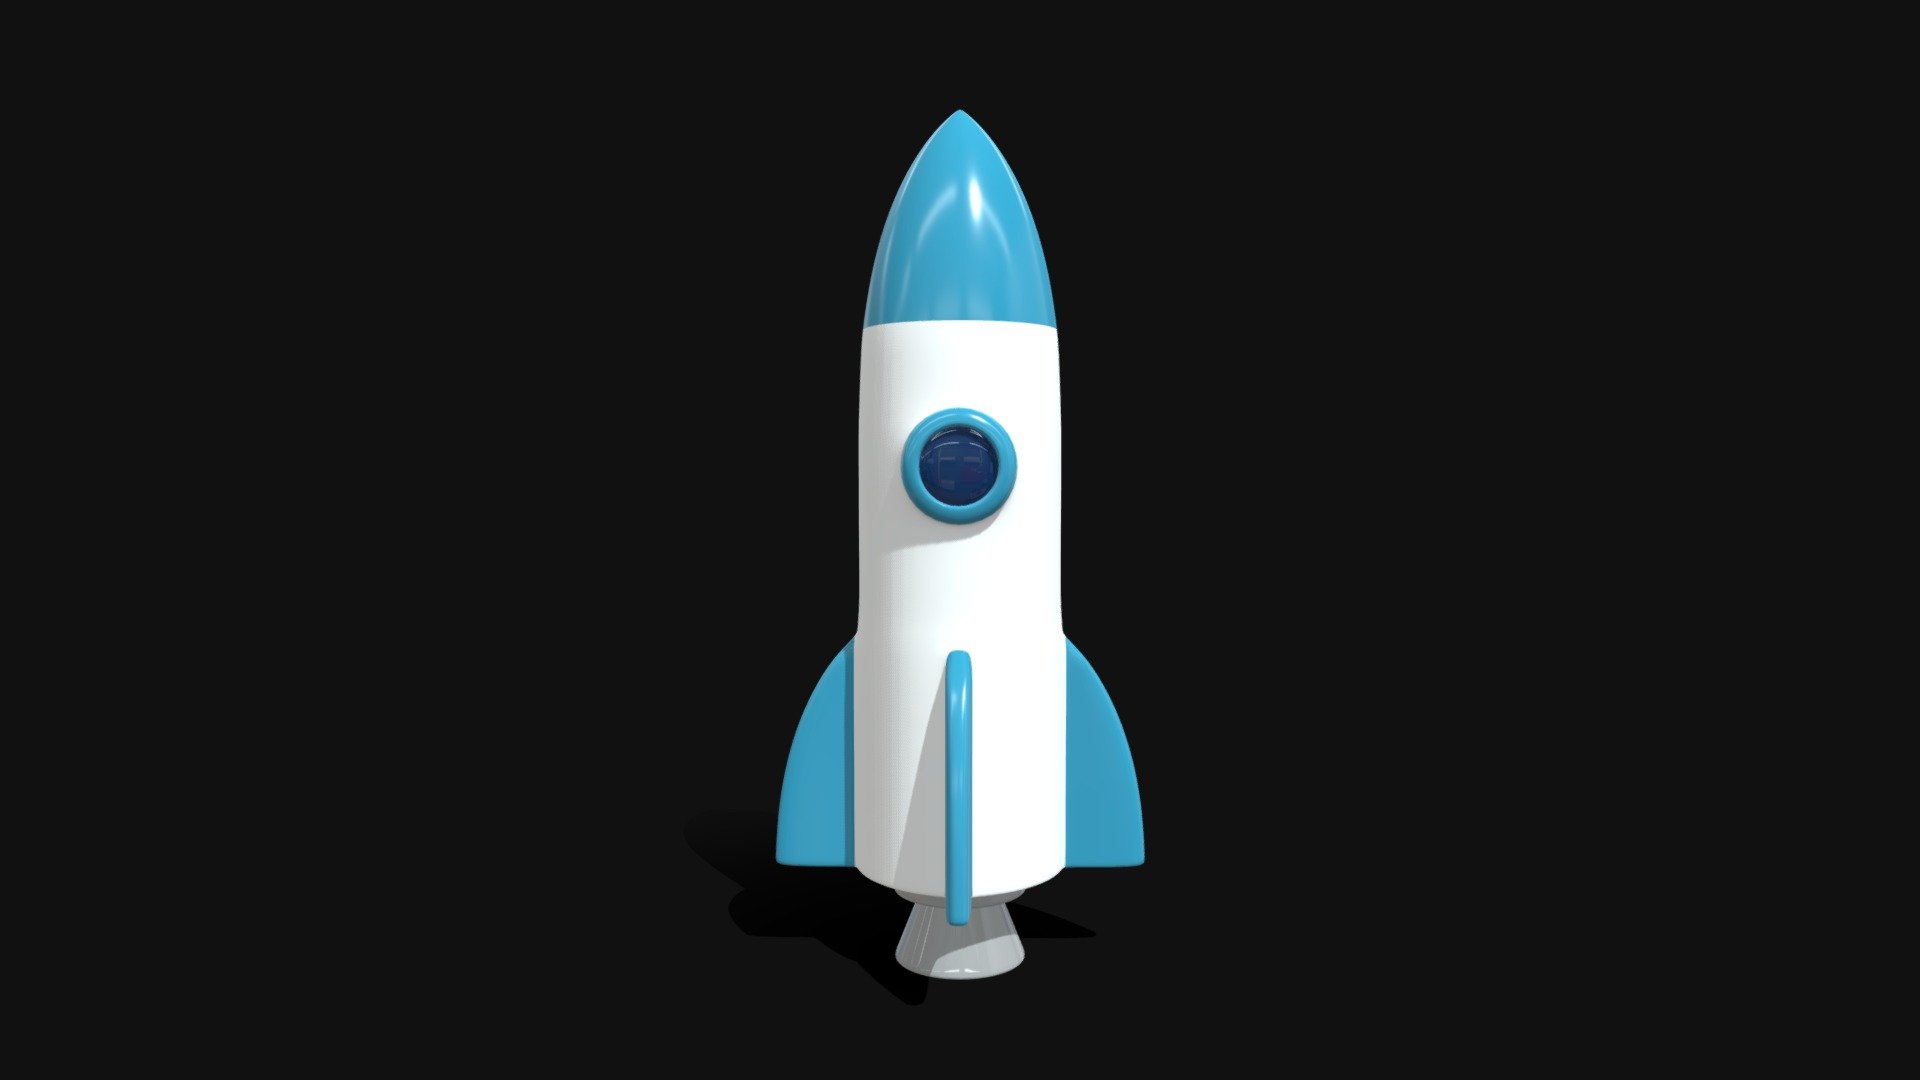 Space Rocket Low Poly Icon Style.
Only quad polygons with correct topology, supports multiple subdivisions.
Archive file contains: .c4d, .fbx, .obj, .mtl, .stl + textures.

! For better results please use subdivision surface without UV smoothing ! - Space Rocket 5 - 3D model by Andrey Sannikov (@ritordp) 3d model